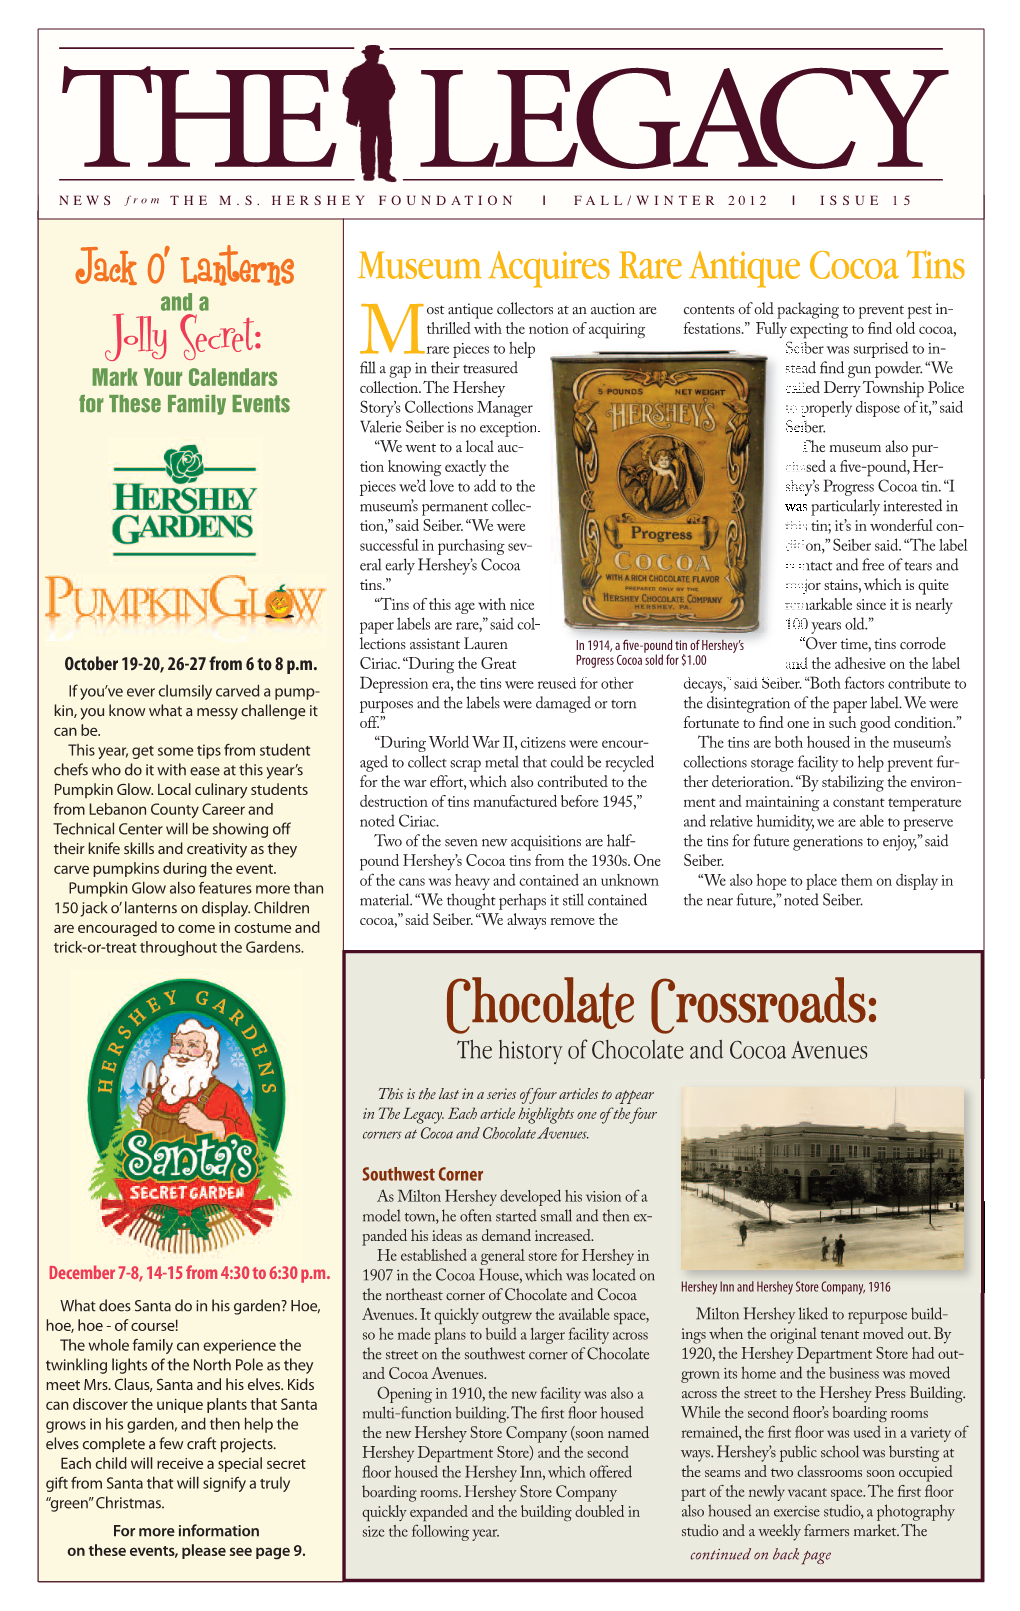 Chocolate Crossroads: the History of Chocolate and Cocoa Avenues